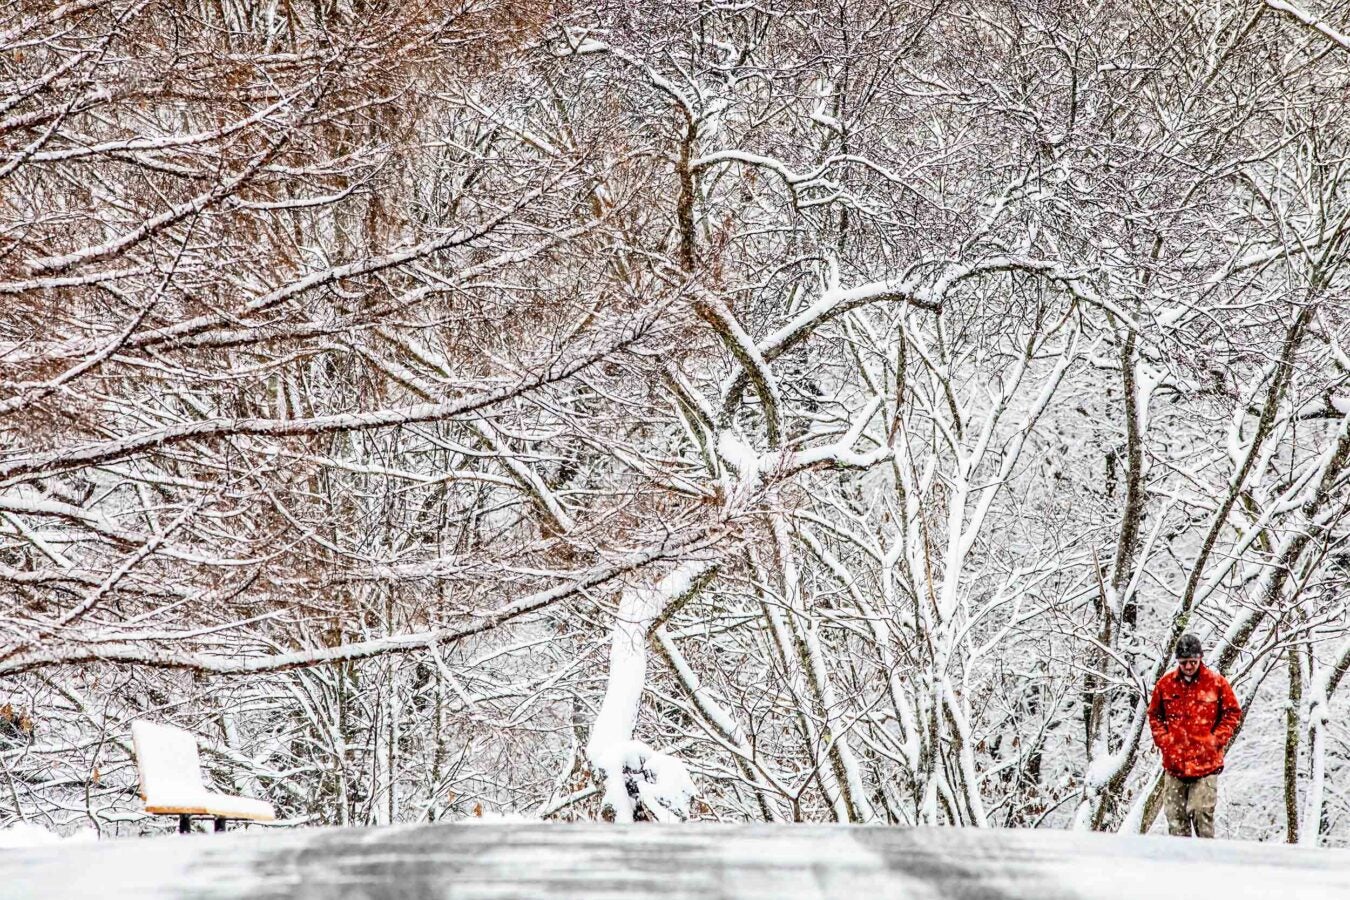 John Jacobs of Roslindale commutes through a snow-covered path of Arnold Arboretum.